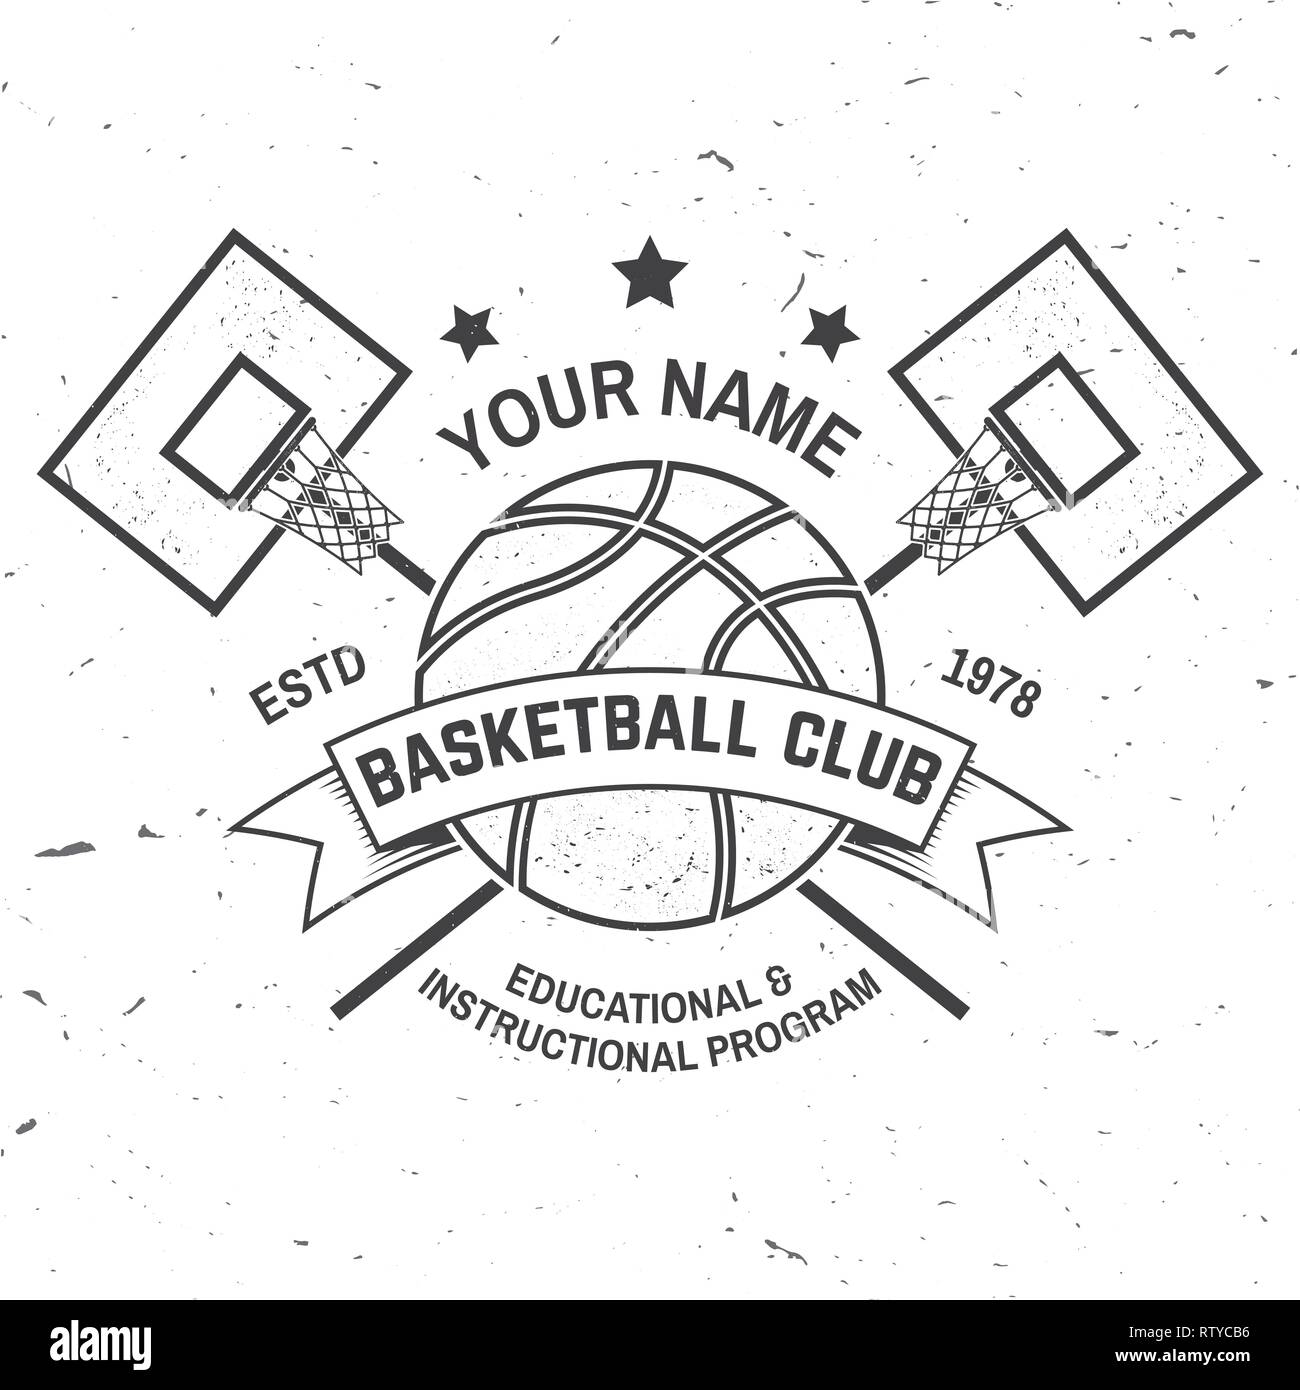 Basketball club badge. Vector illustration. Concept for shirt, print, stamp or tee. Vintage typography design with basketball ring, basketball hoop and ball silhouette. Stock Vector